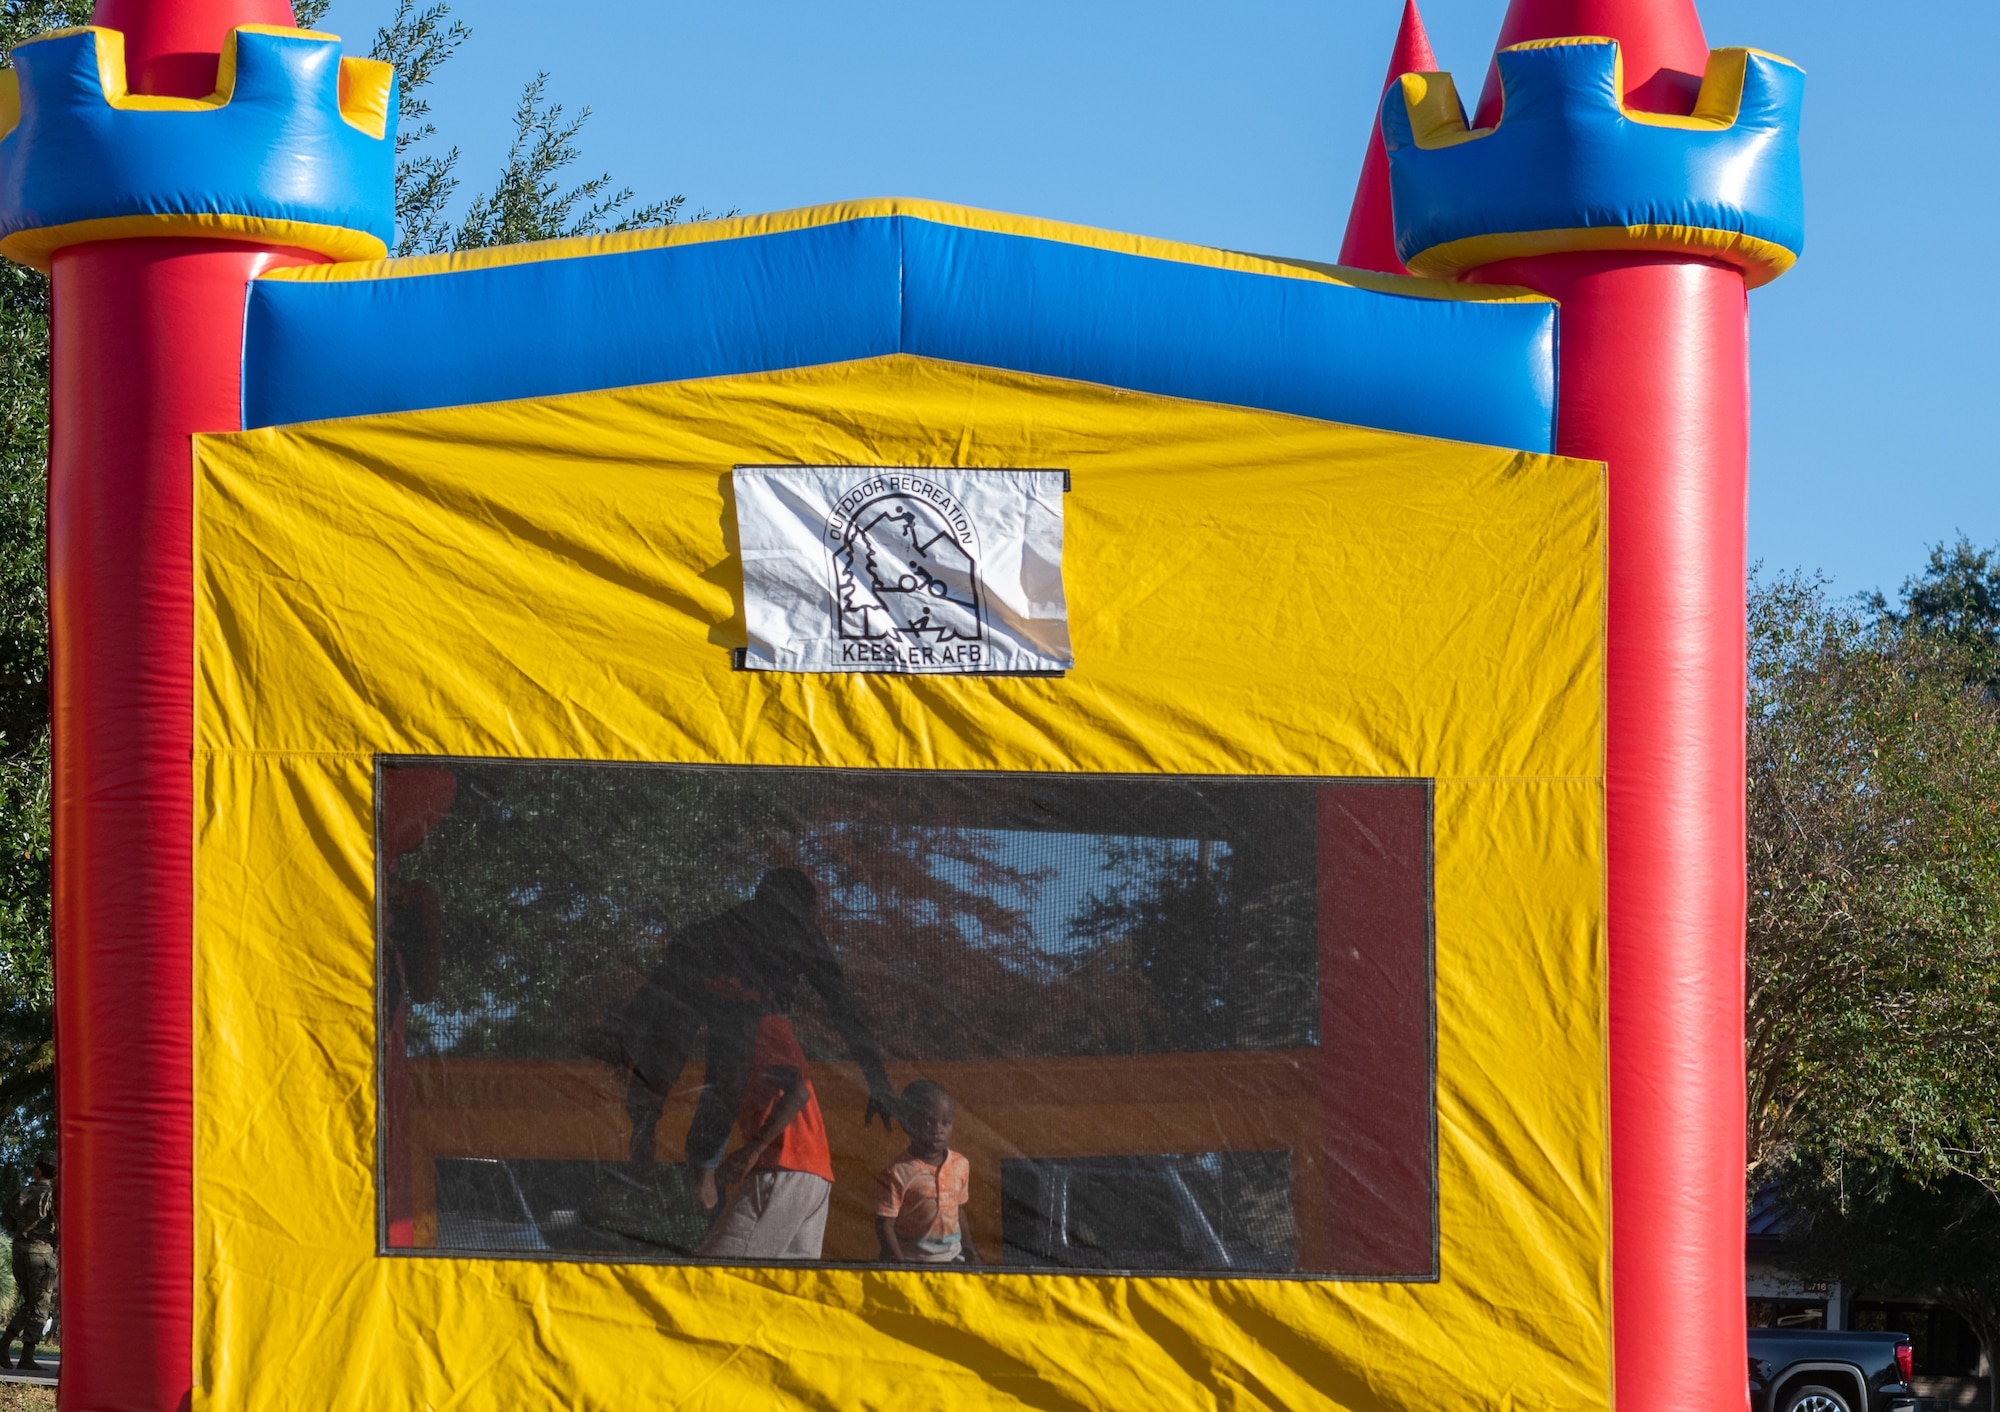 Keesler children play in a bounce house during the Tails 'N Ales Annual Shrimp Cook-off outside the Bay Breeze Event Center at Keesler Air Force Base, Mississippi, Oct. 14, 2022. The 81st Force Support Squadron hosted event offered a variety of craft beers for tasting and many teams fighting for the ultimate best shrimp recipe. (U.S. Air Force photo by Andre' Askew)